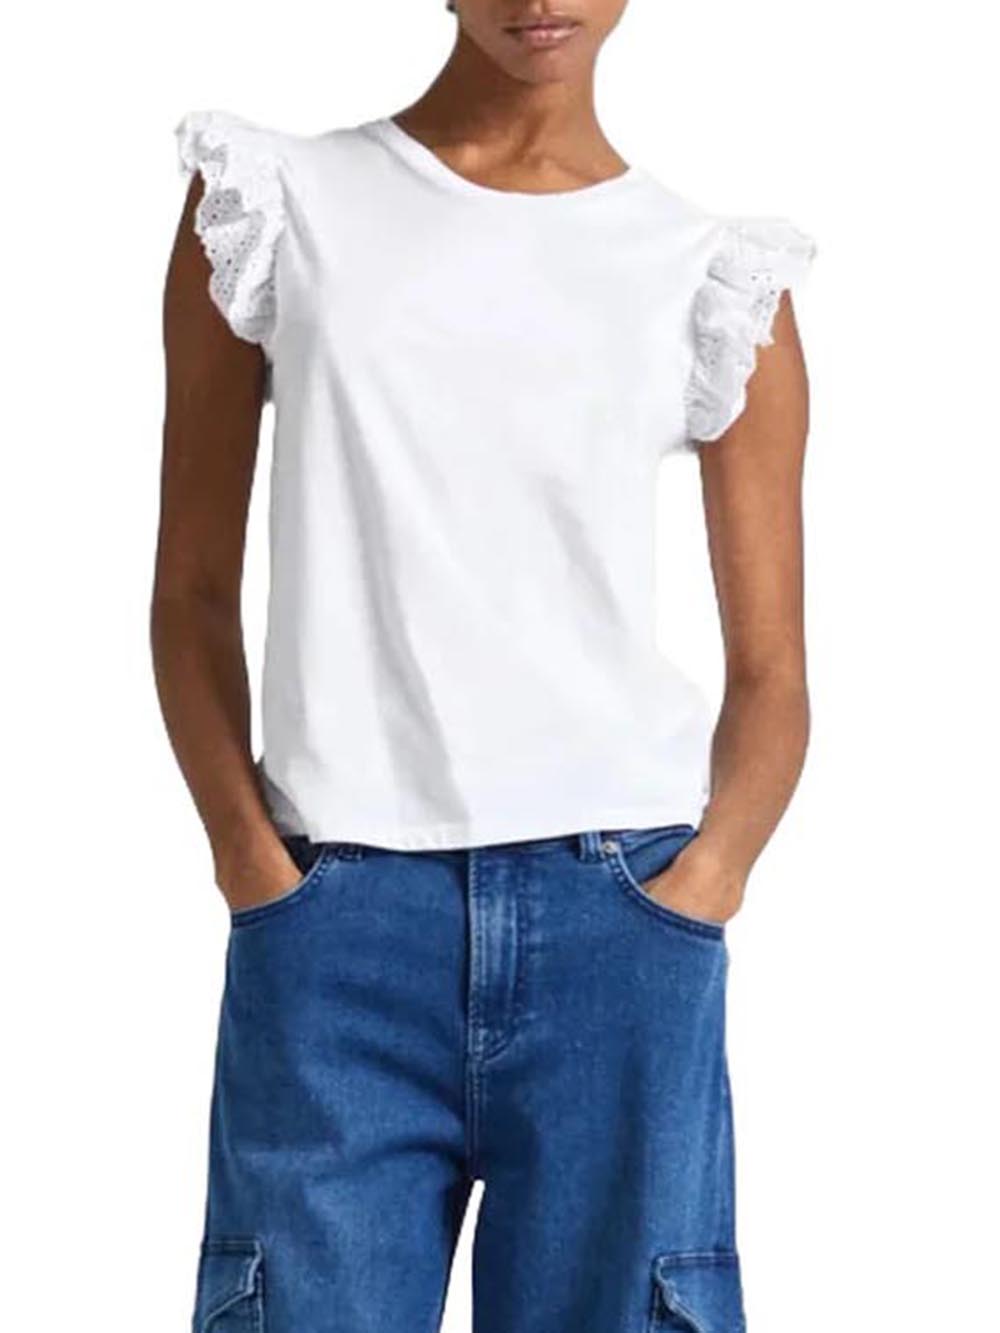 Pepe Jeans T-shirt Donna Bianco